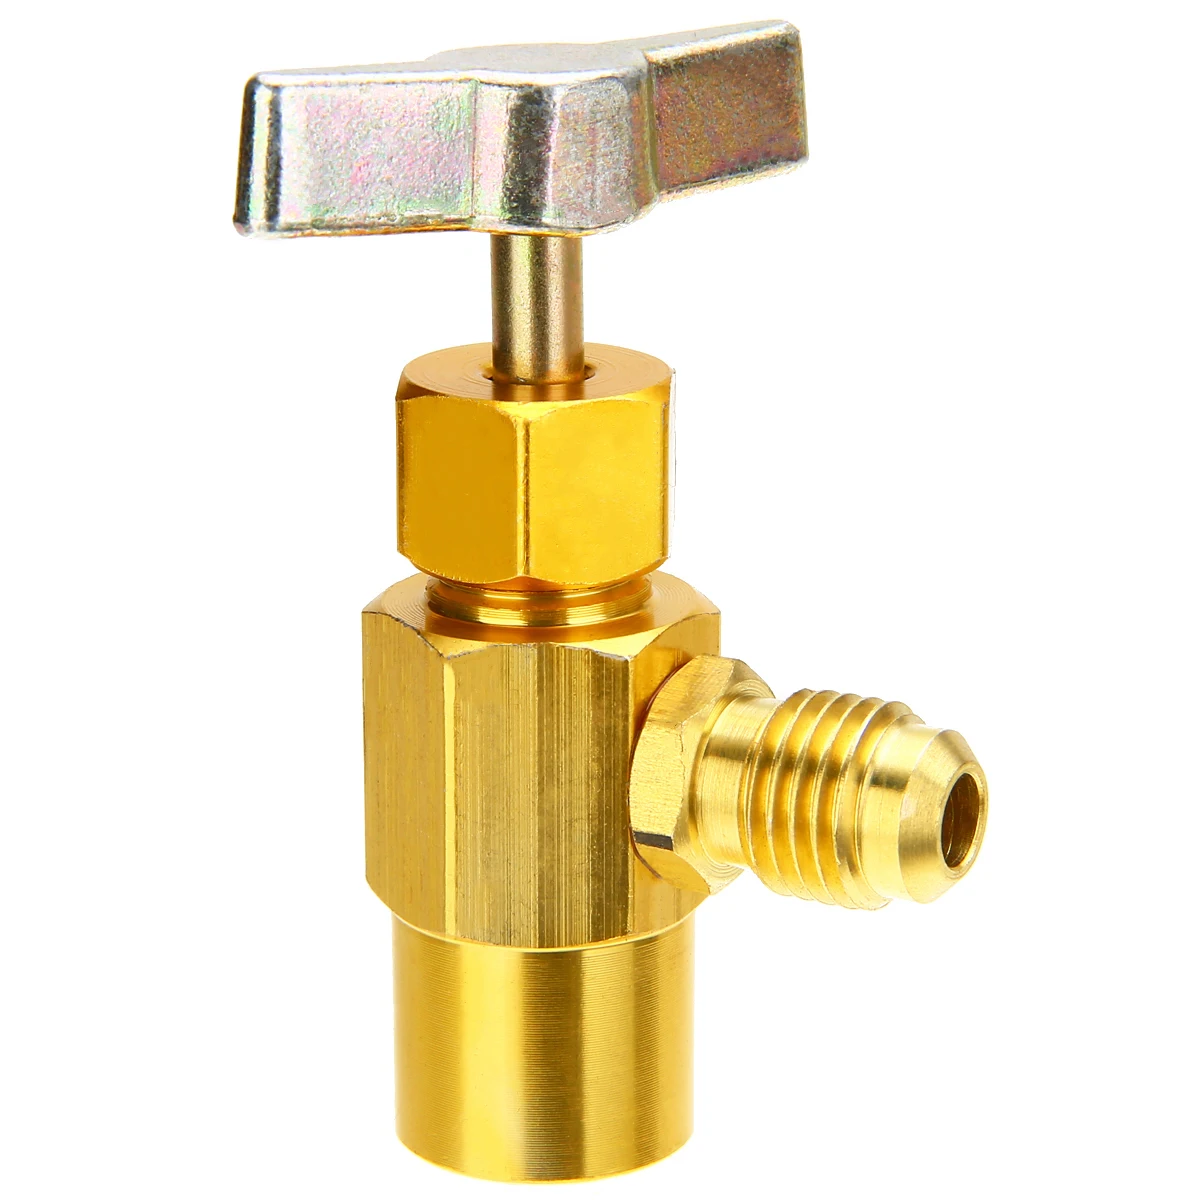 R-134 AC R-134a Refrigerant Tap Can Dispensing 1/2" ACME Thread Valve Hand TooES 